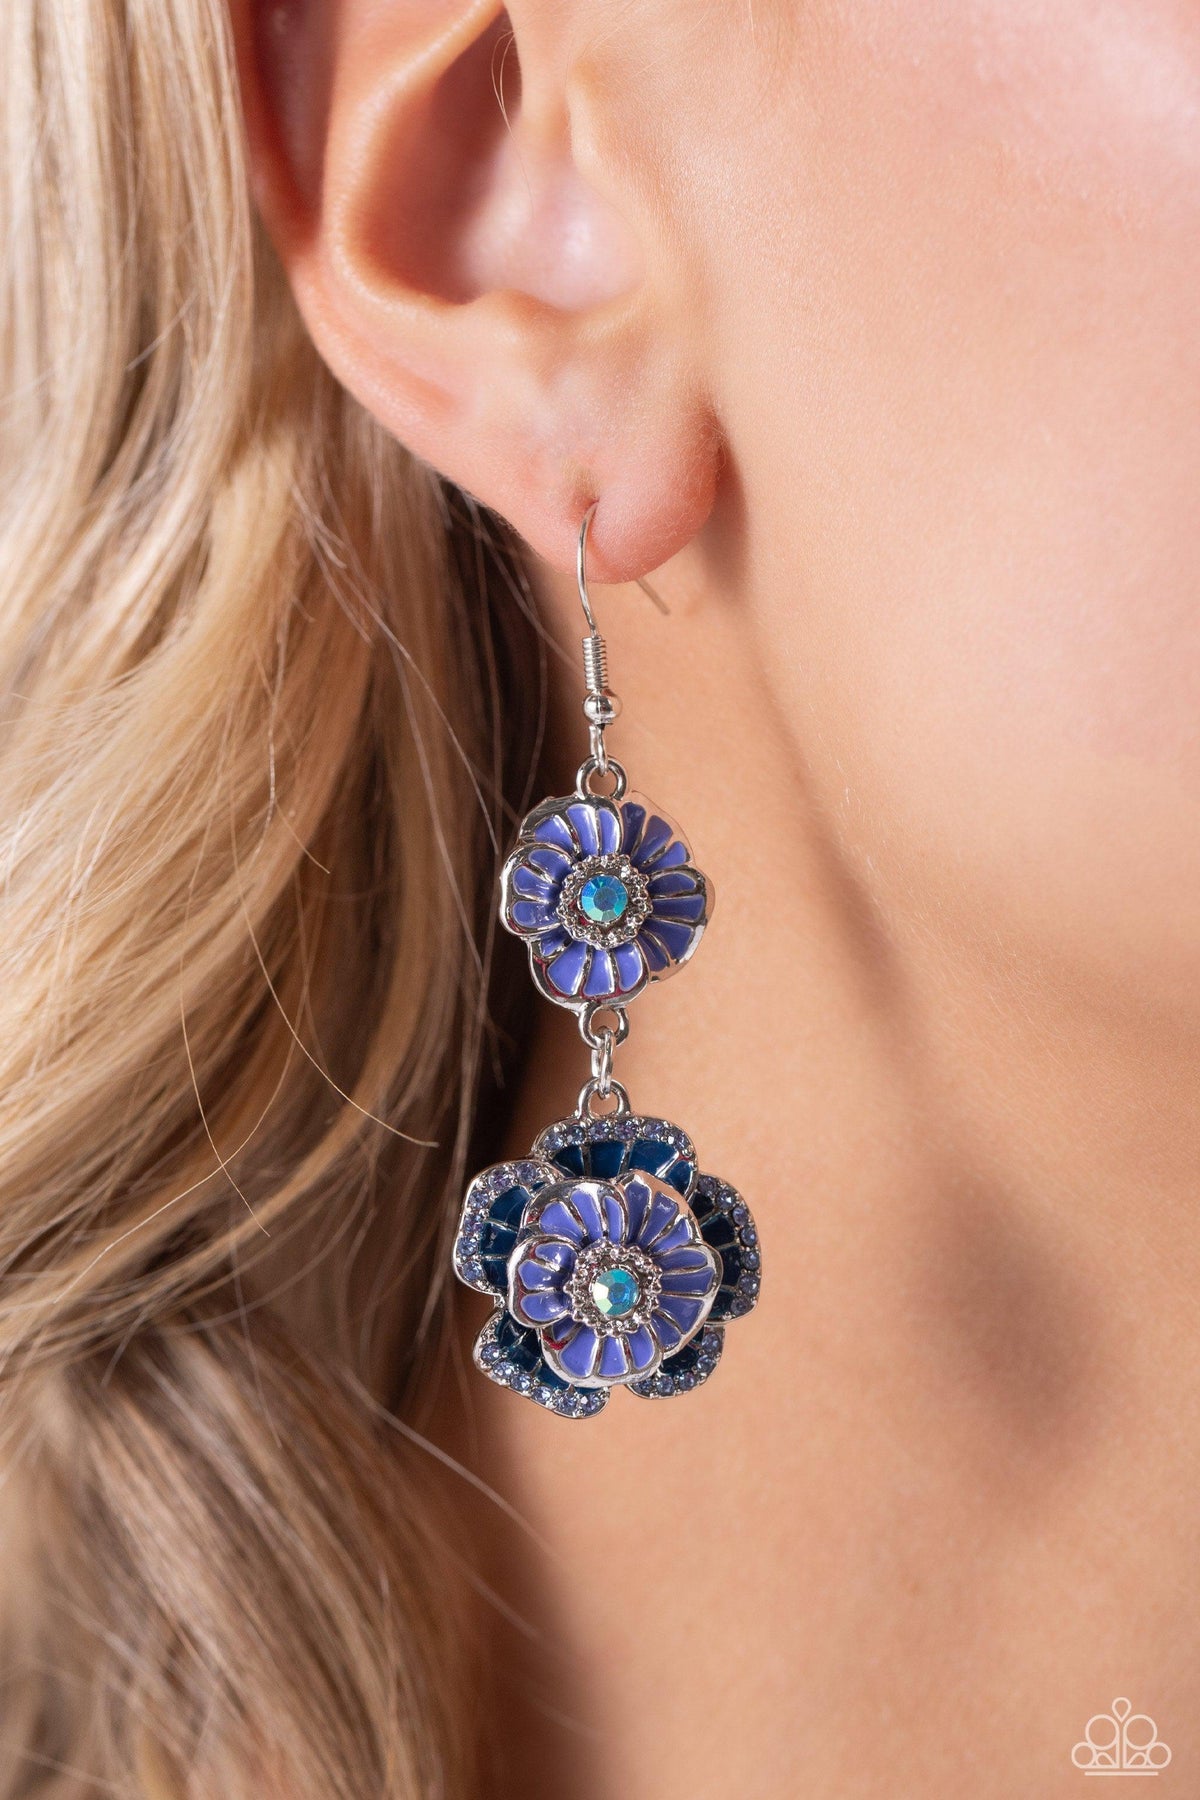 Intricate Impression Blue Rhinestone Flower Earrings - Paparazzi Accessories-on model - CarasShop.com - $5 Jewelry by Cara Jewels